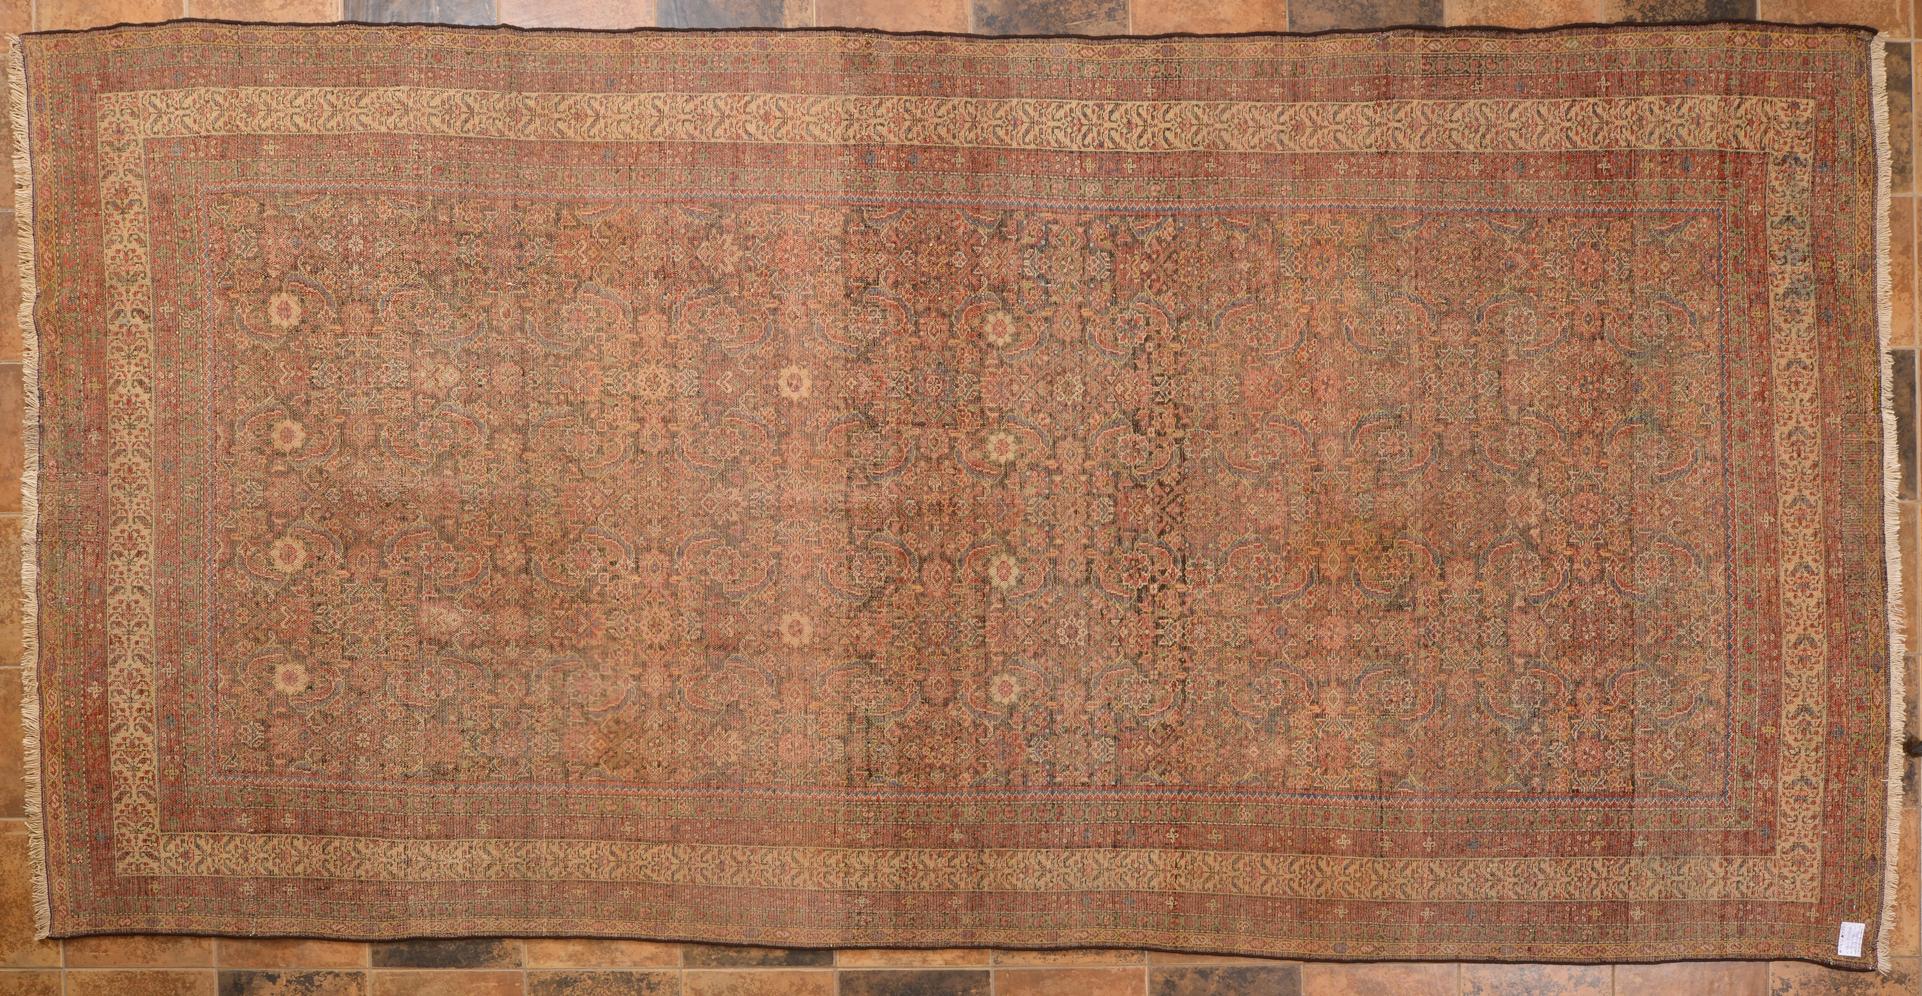 Large elegant carpet which was set at the top of the main carpet, to complete it: therefore important rug, even if very sober in design because it had to be accompanied to another main carpet.
From my private collection. (nr. 118).